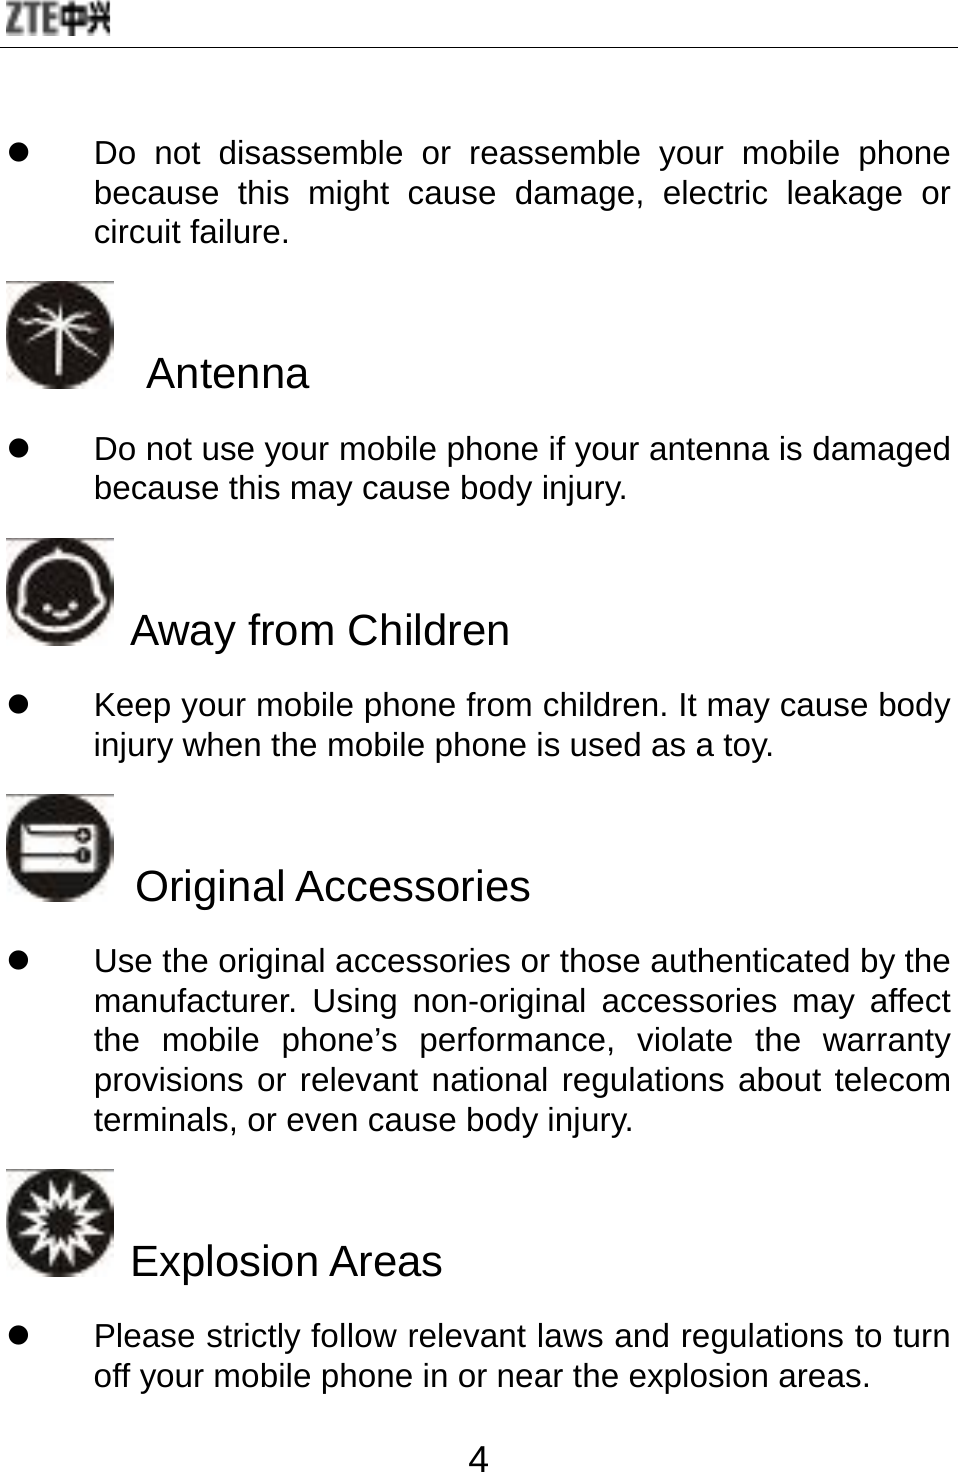  4 z  Do not disassemble or reassemble your mobile phone because this might cause damage, electric leakage or circuit failure.   Antenna z  Do not use your mobile phone if your antenna is damaged because this may cause body injury.  Away from Children z  Keep your mobile phone from children. It may cause body injury when the mobile phone is used as a toy.  Original Accessories z  Use the original accessories or those authenticated by the manufacturer. Using non-original accessories may affect the mobile phone’s performance, violate the warranty provisions or relevant national regulations about telecom terminals, or even cause body injury.      Explosion Areas z  Please strictly follow relevant laws and regulations to turn off your mobile phone in or near the explosion areas.   